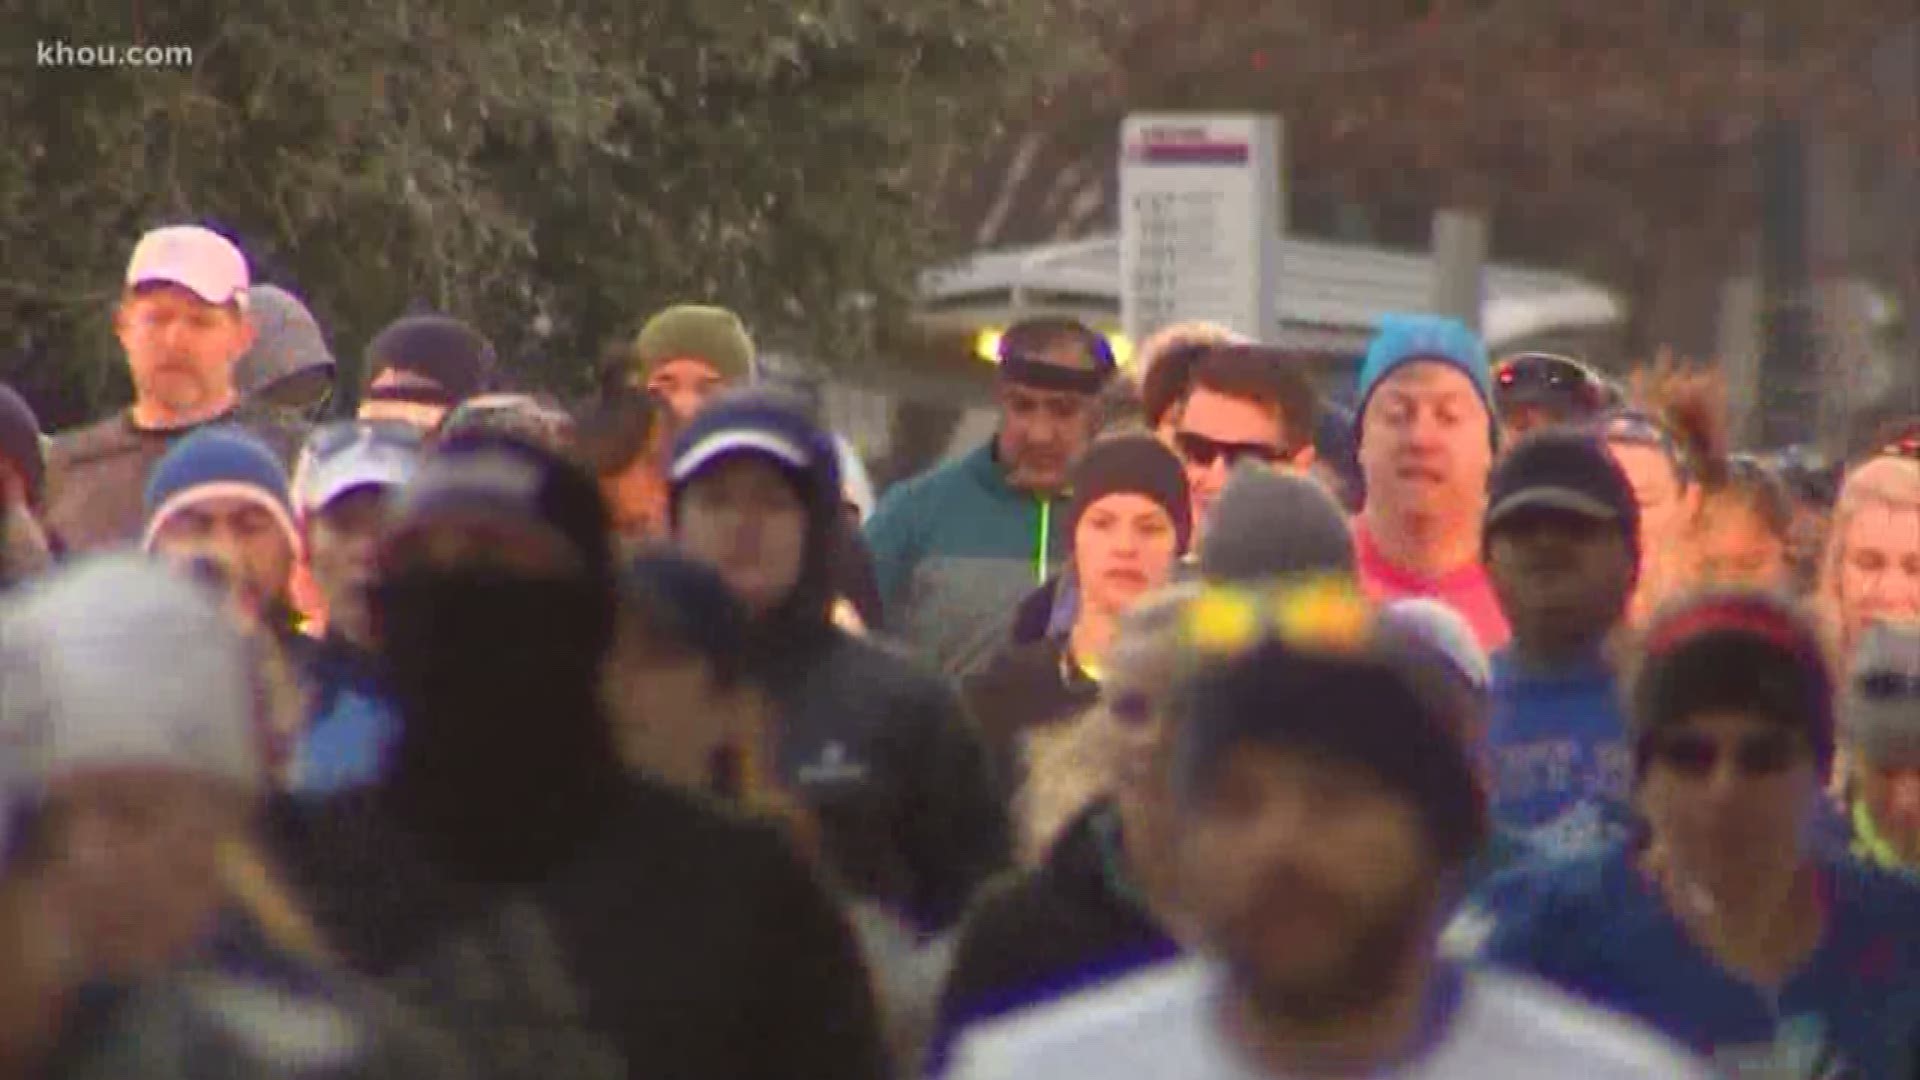 Twenty-five thousand people from all over the world will run in the Chevron Houston Marathon this weekend.